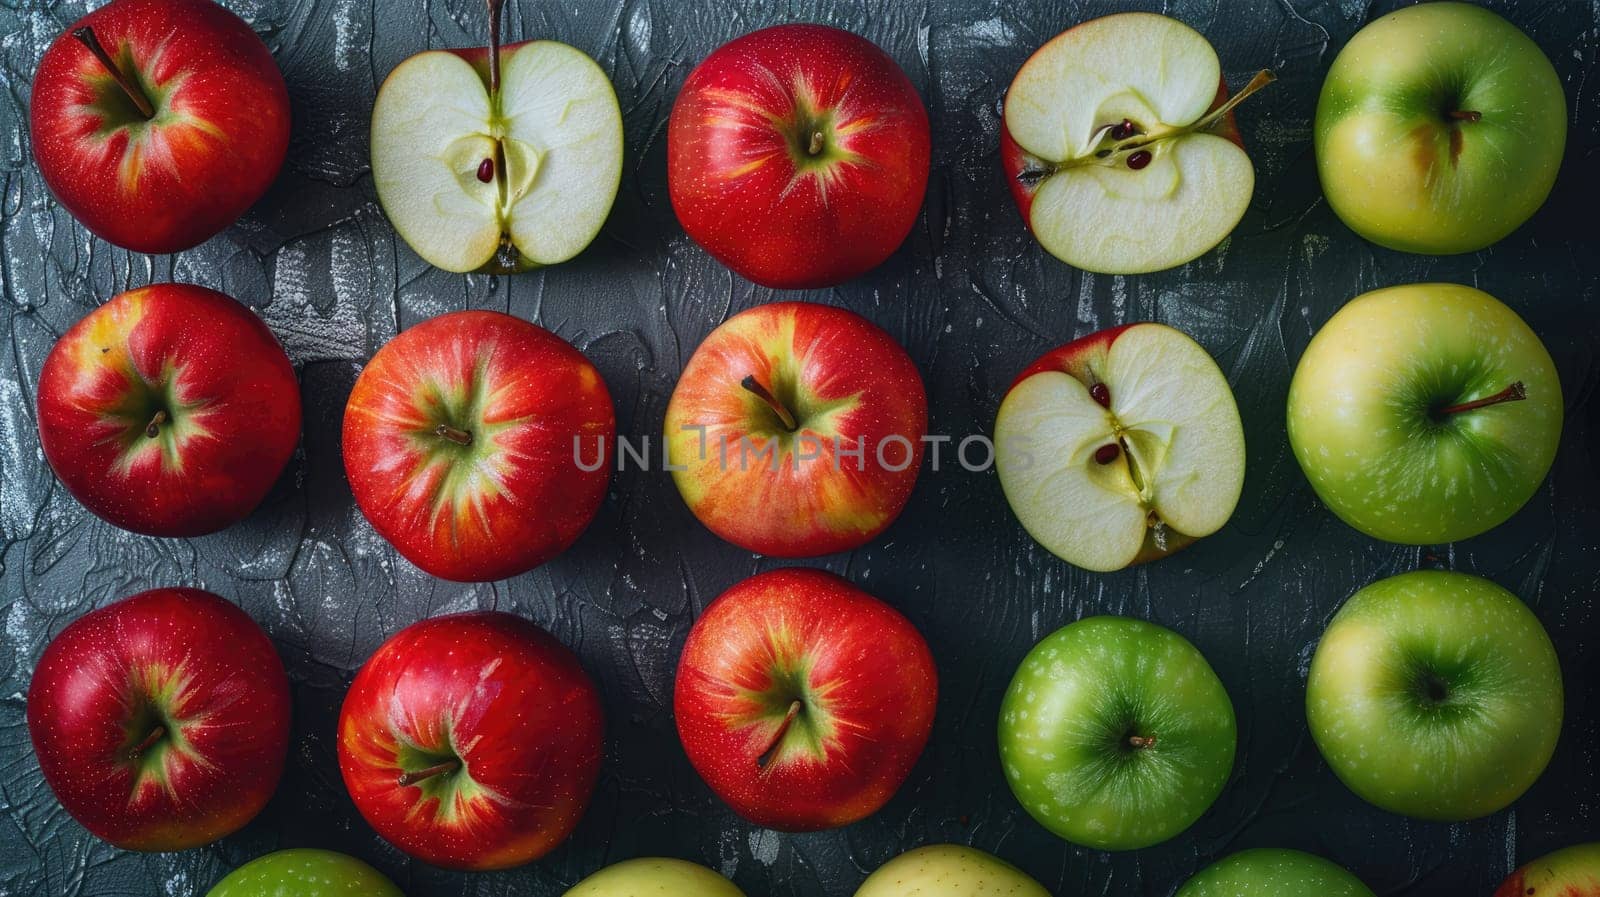 Sliced apple and whole apples on a textured gray background AI